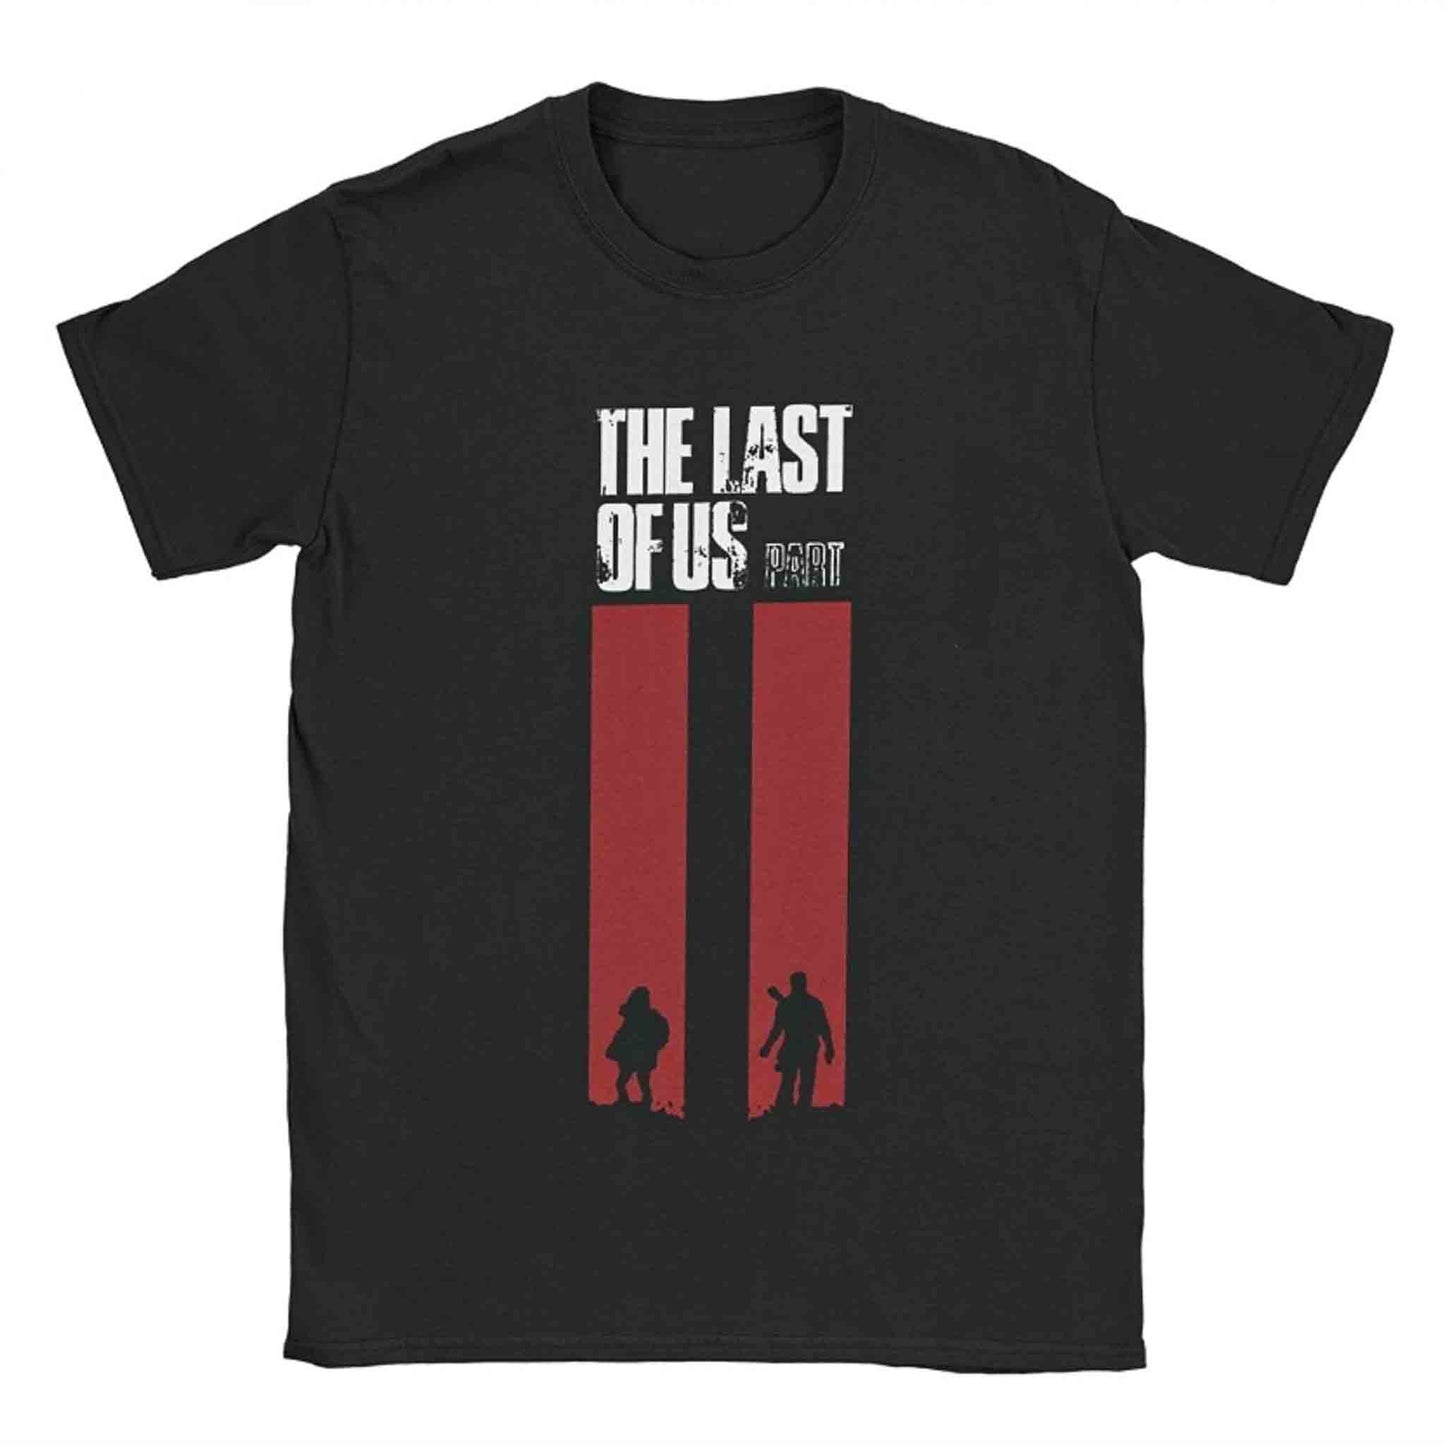 The Last of Us Look For The Light Tshirt - Option 2 / XS Available at 2Fast2See.co